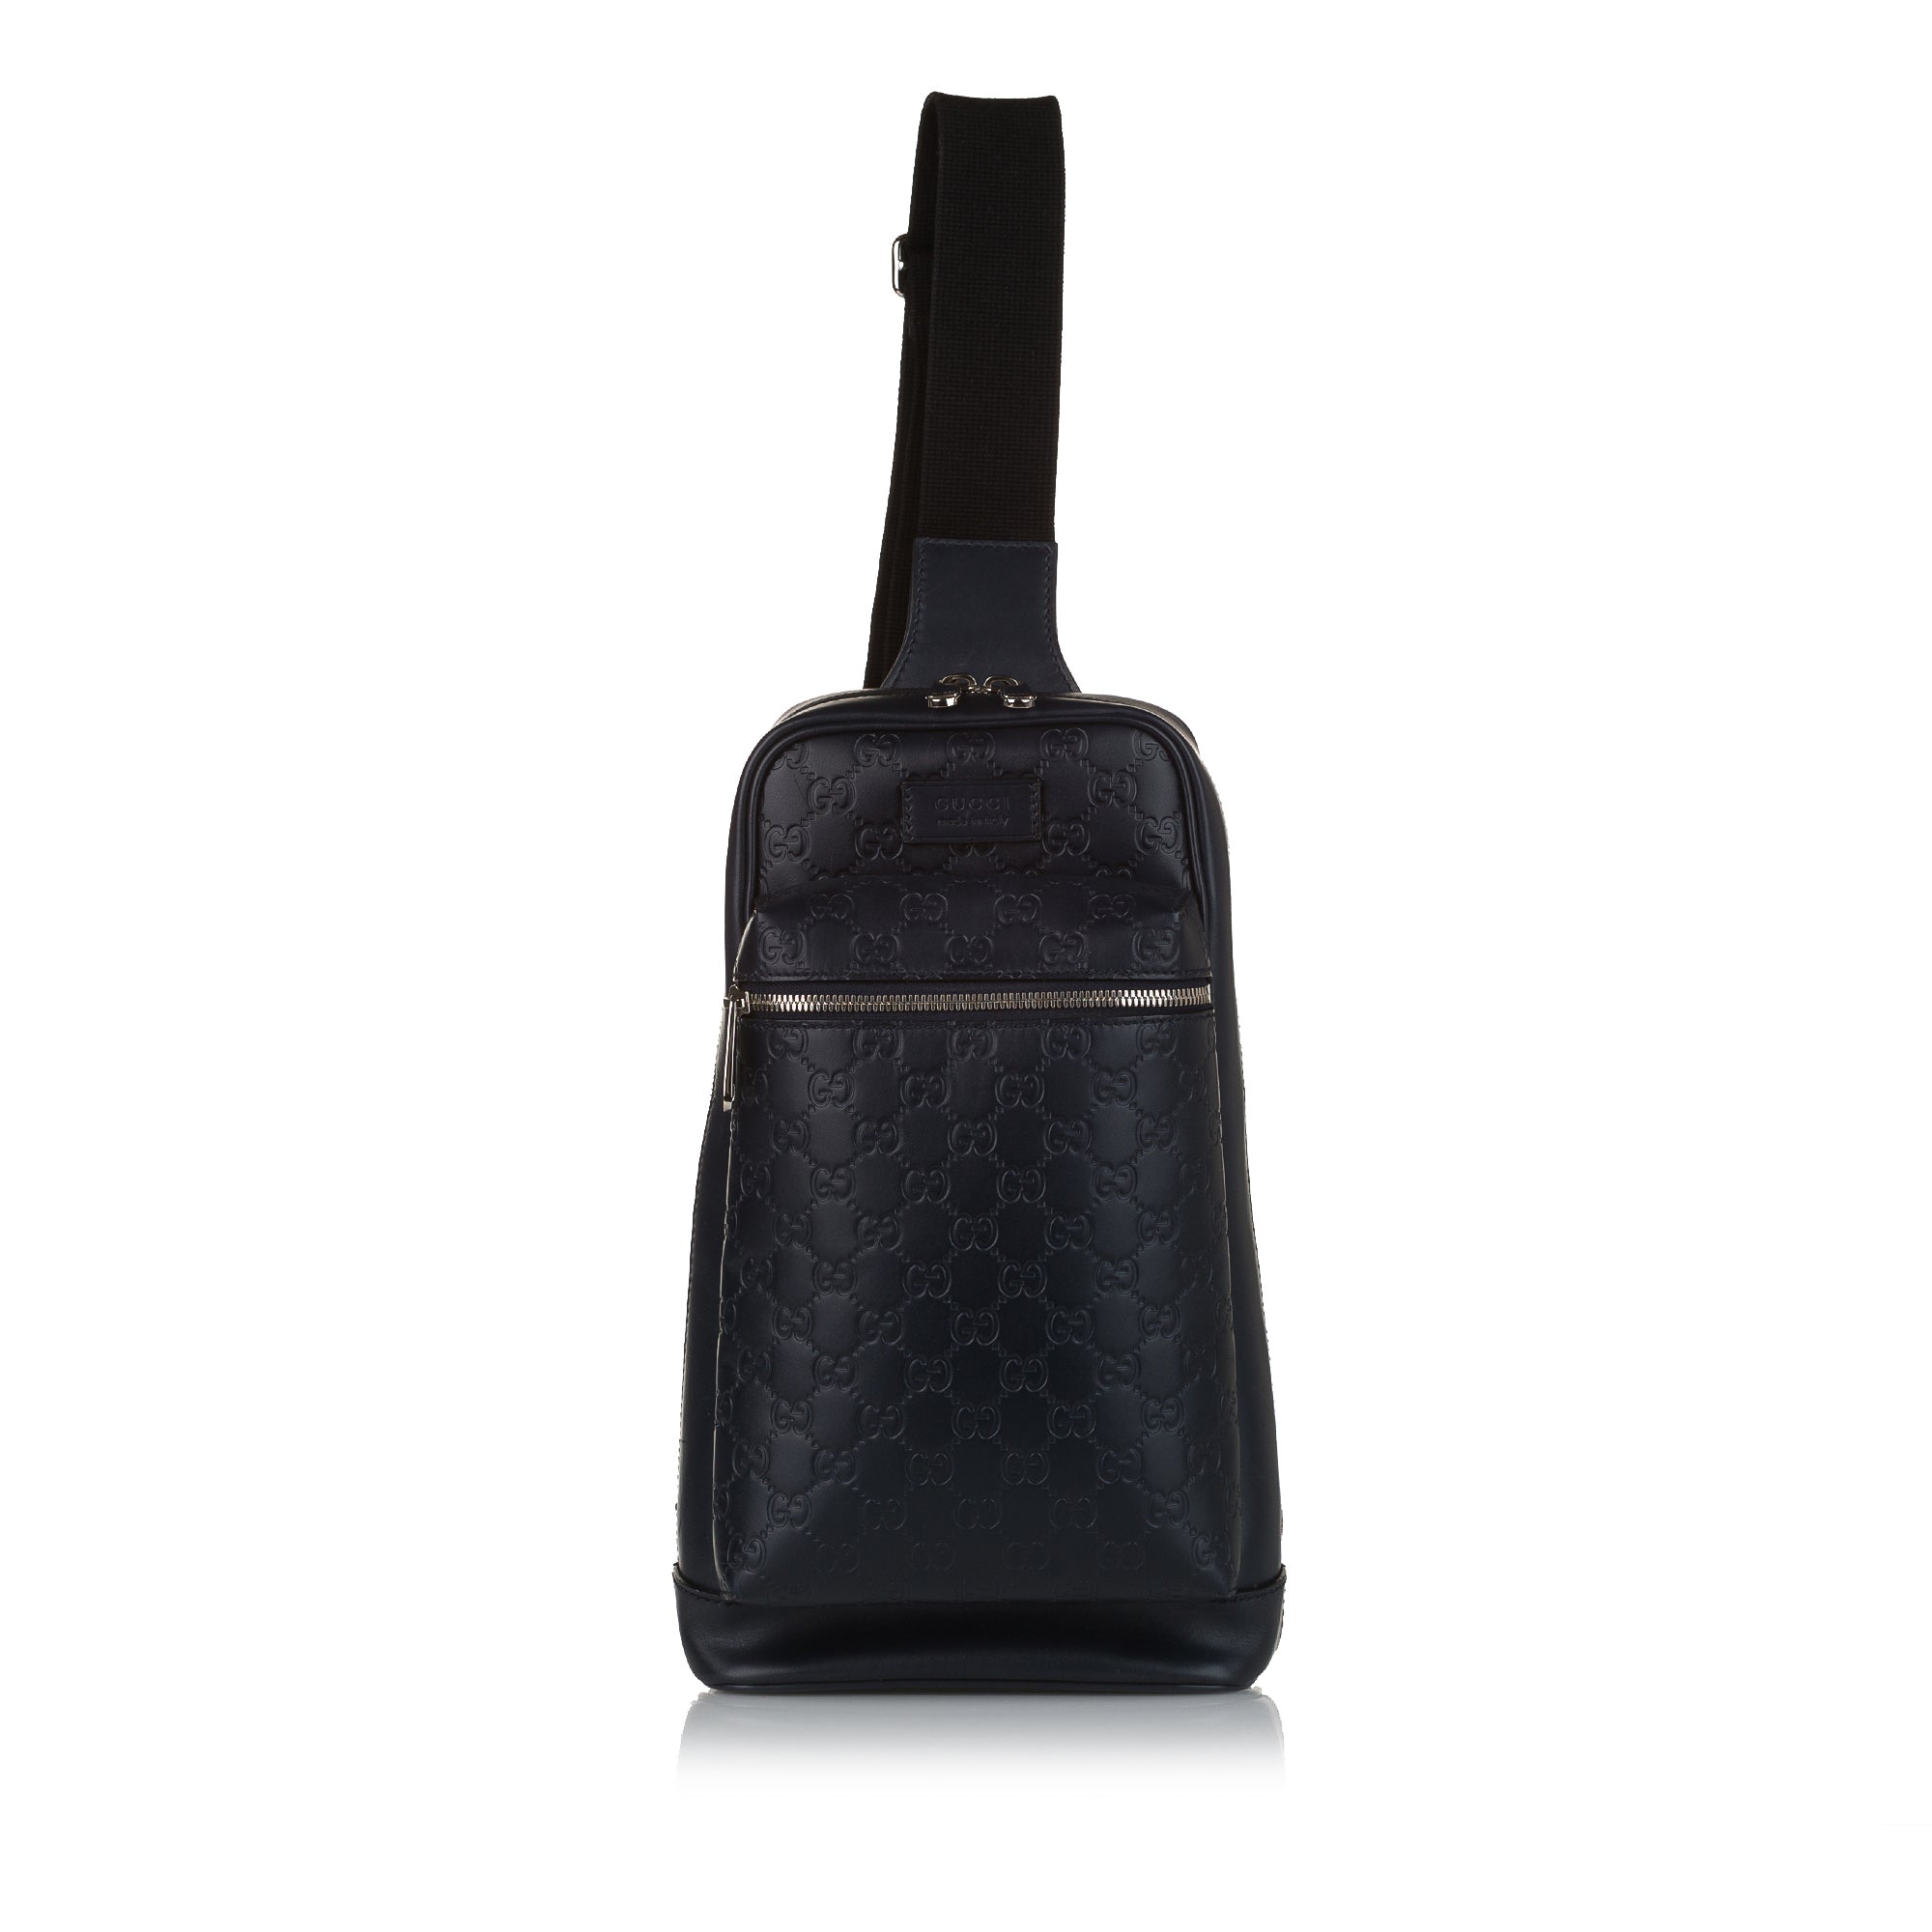 LOUIS VUITTON MINI BACKPACK PURSE - clothing & accessories - by owner -  apparel sale - craigslist